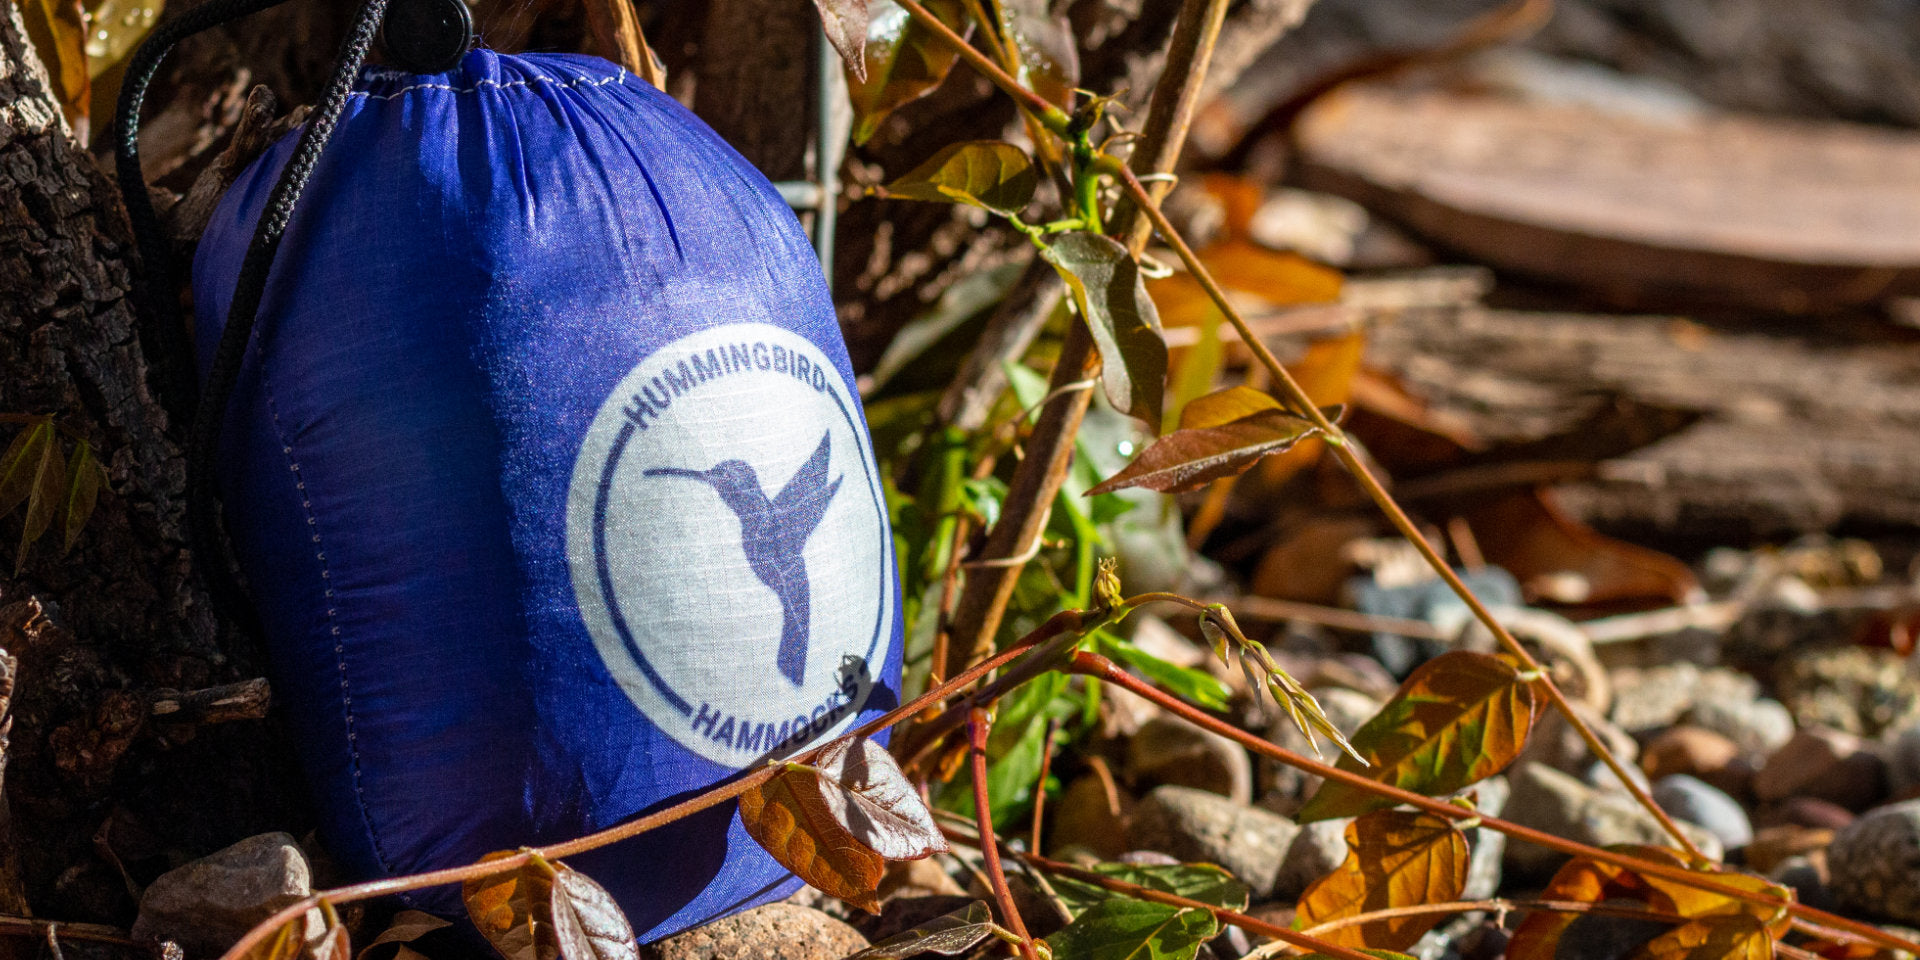 Deep Purple Single+ Hammock close up showing the dye sublimated logo in a natural setting